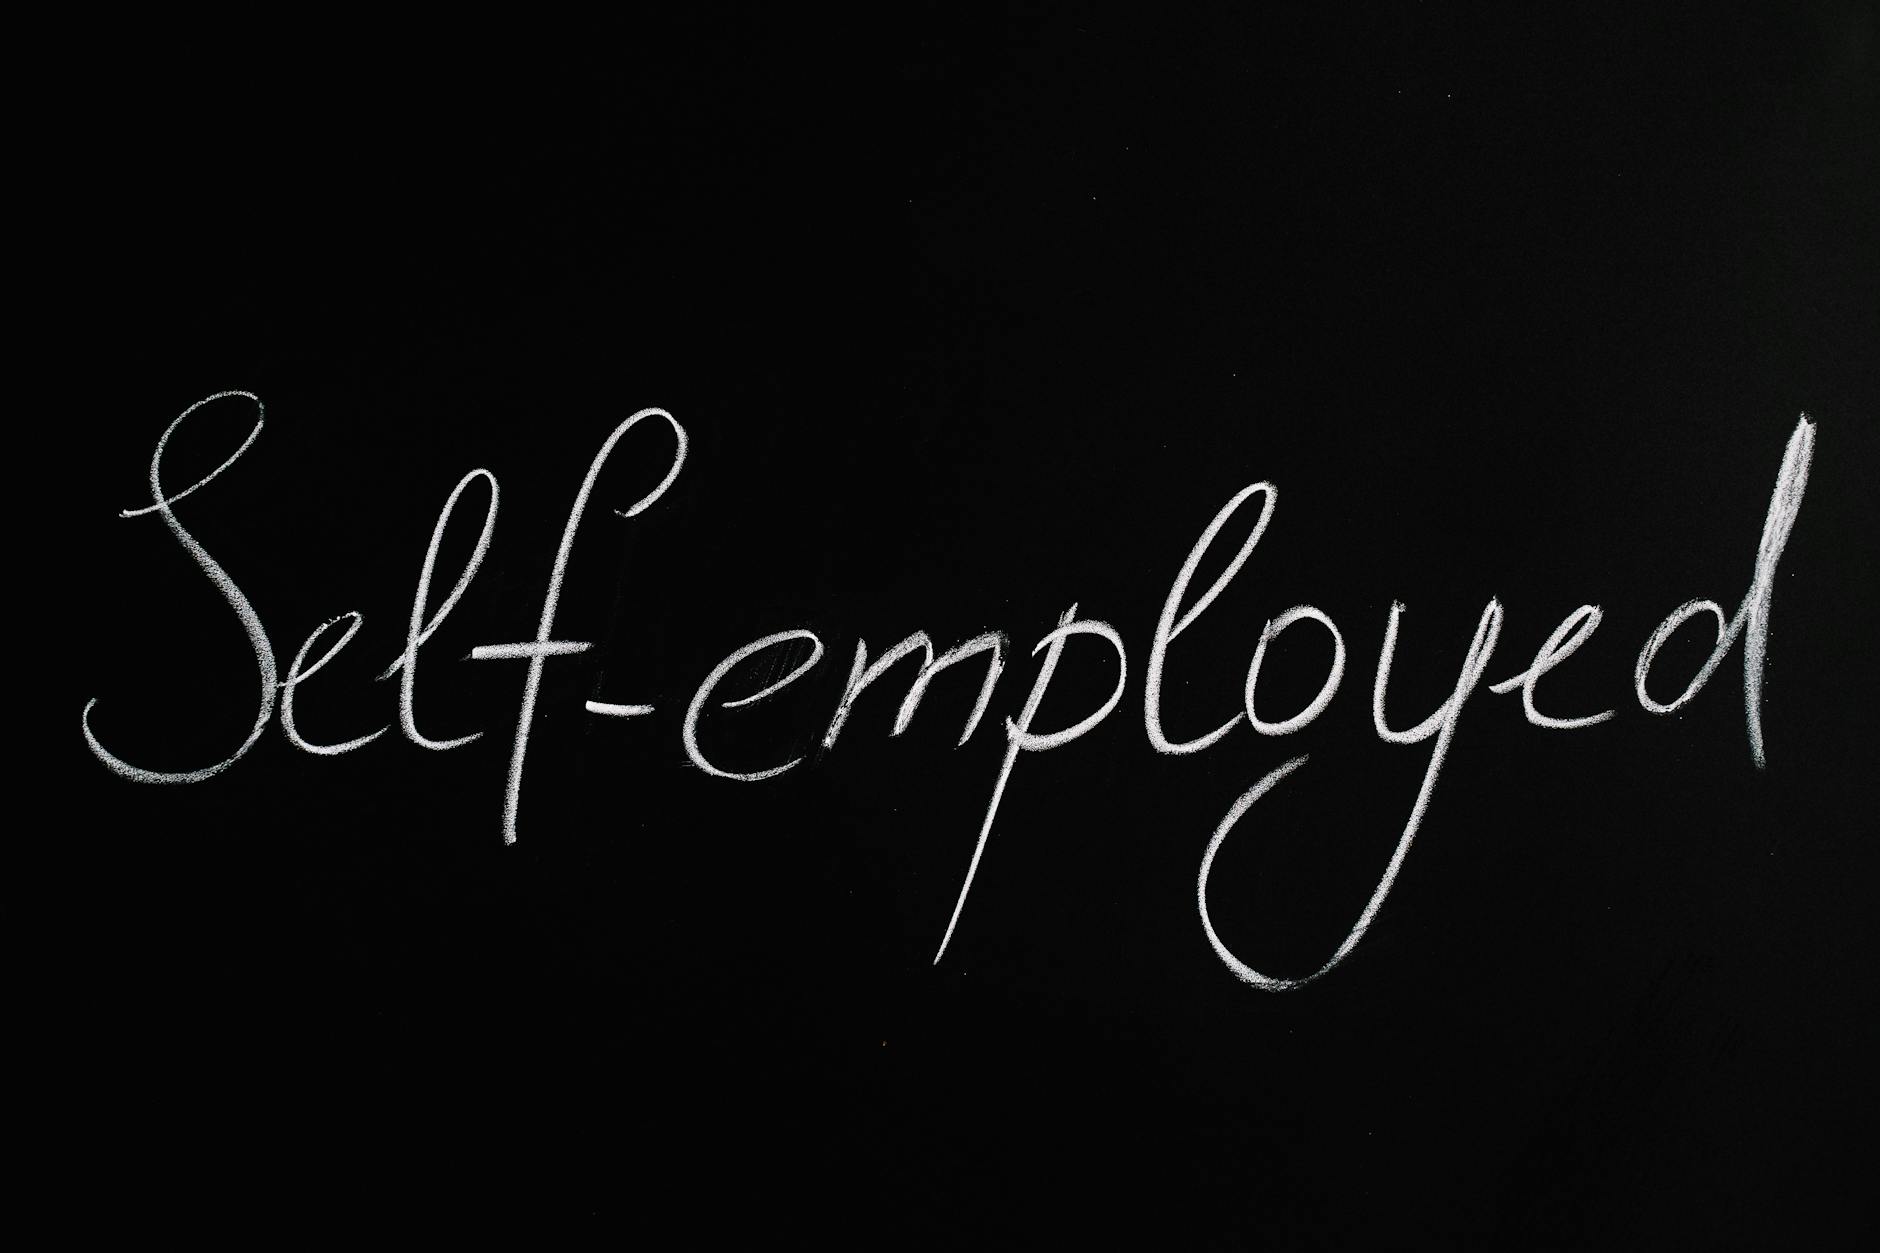 Self-Employed Lettering Text on Black Background